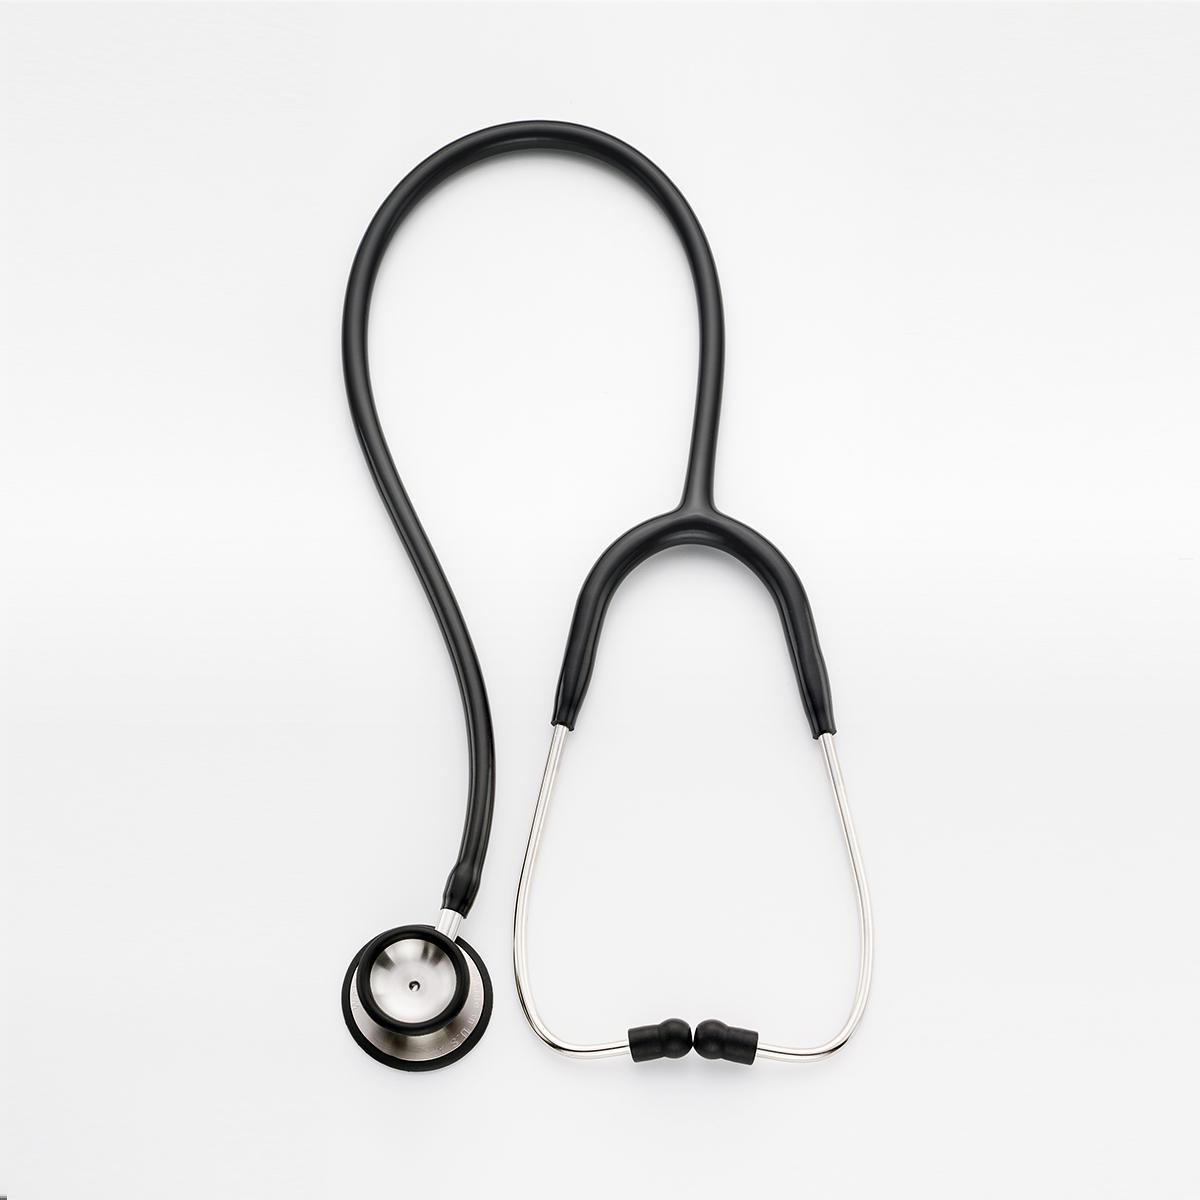 Professional Adult Stethoscope overhead view